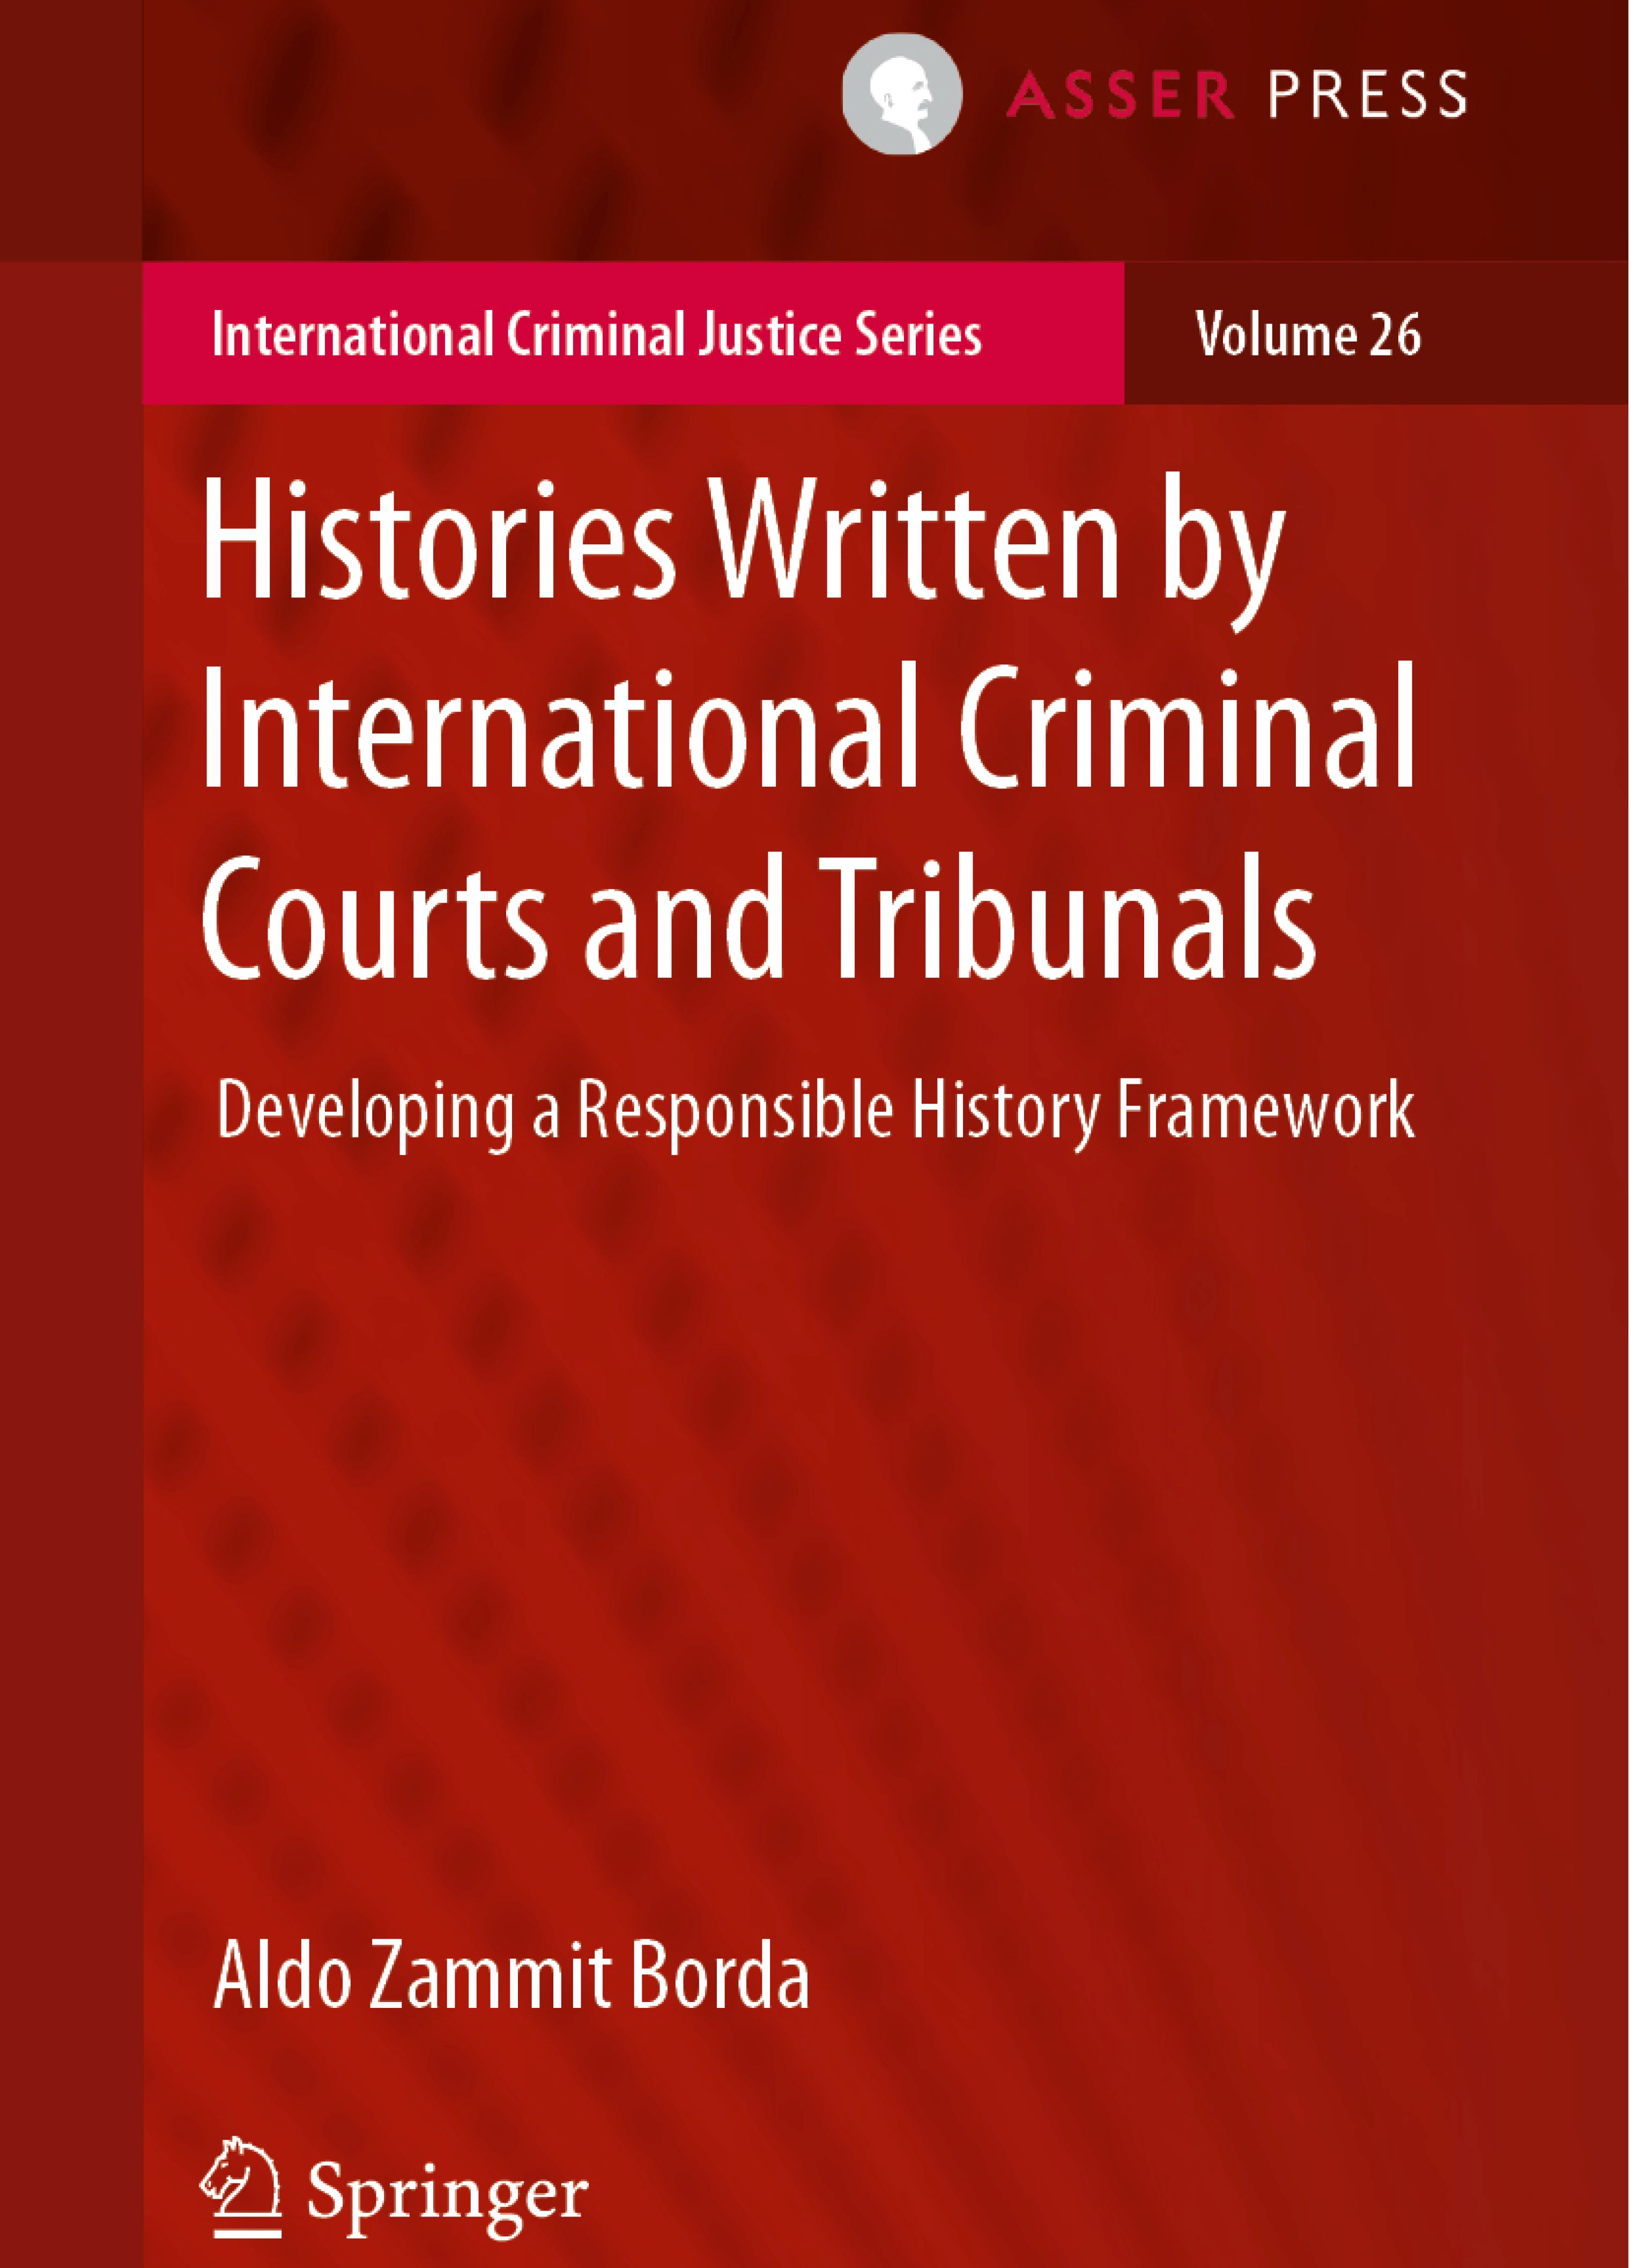 Histories Written by International Criminal Courts and Tribunals - Developing a Responsible History Framework